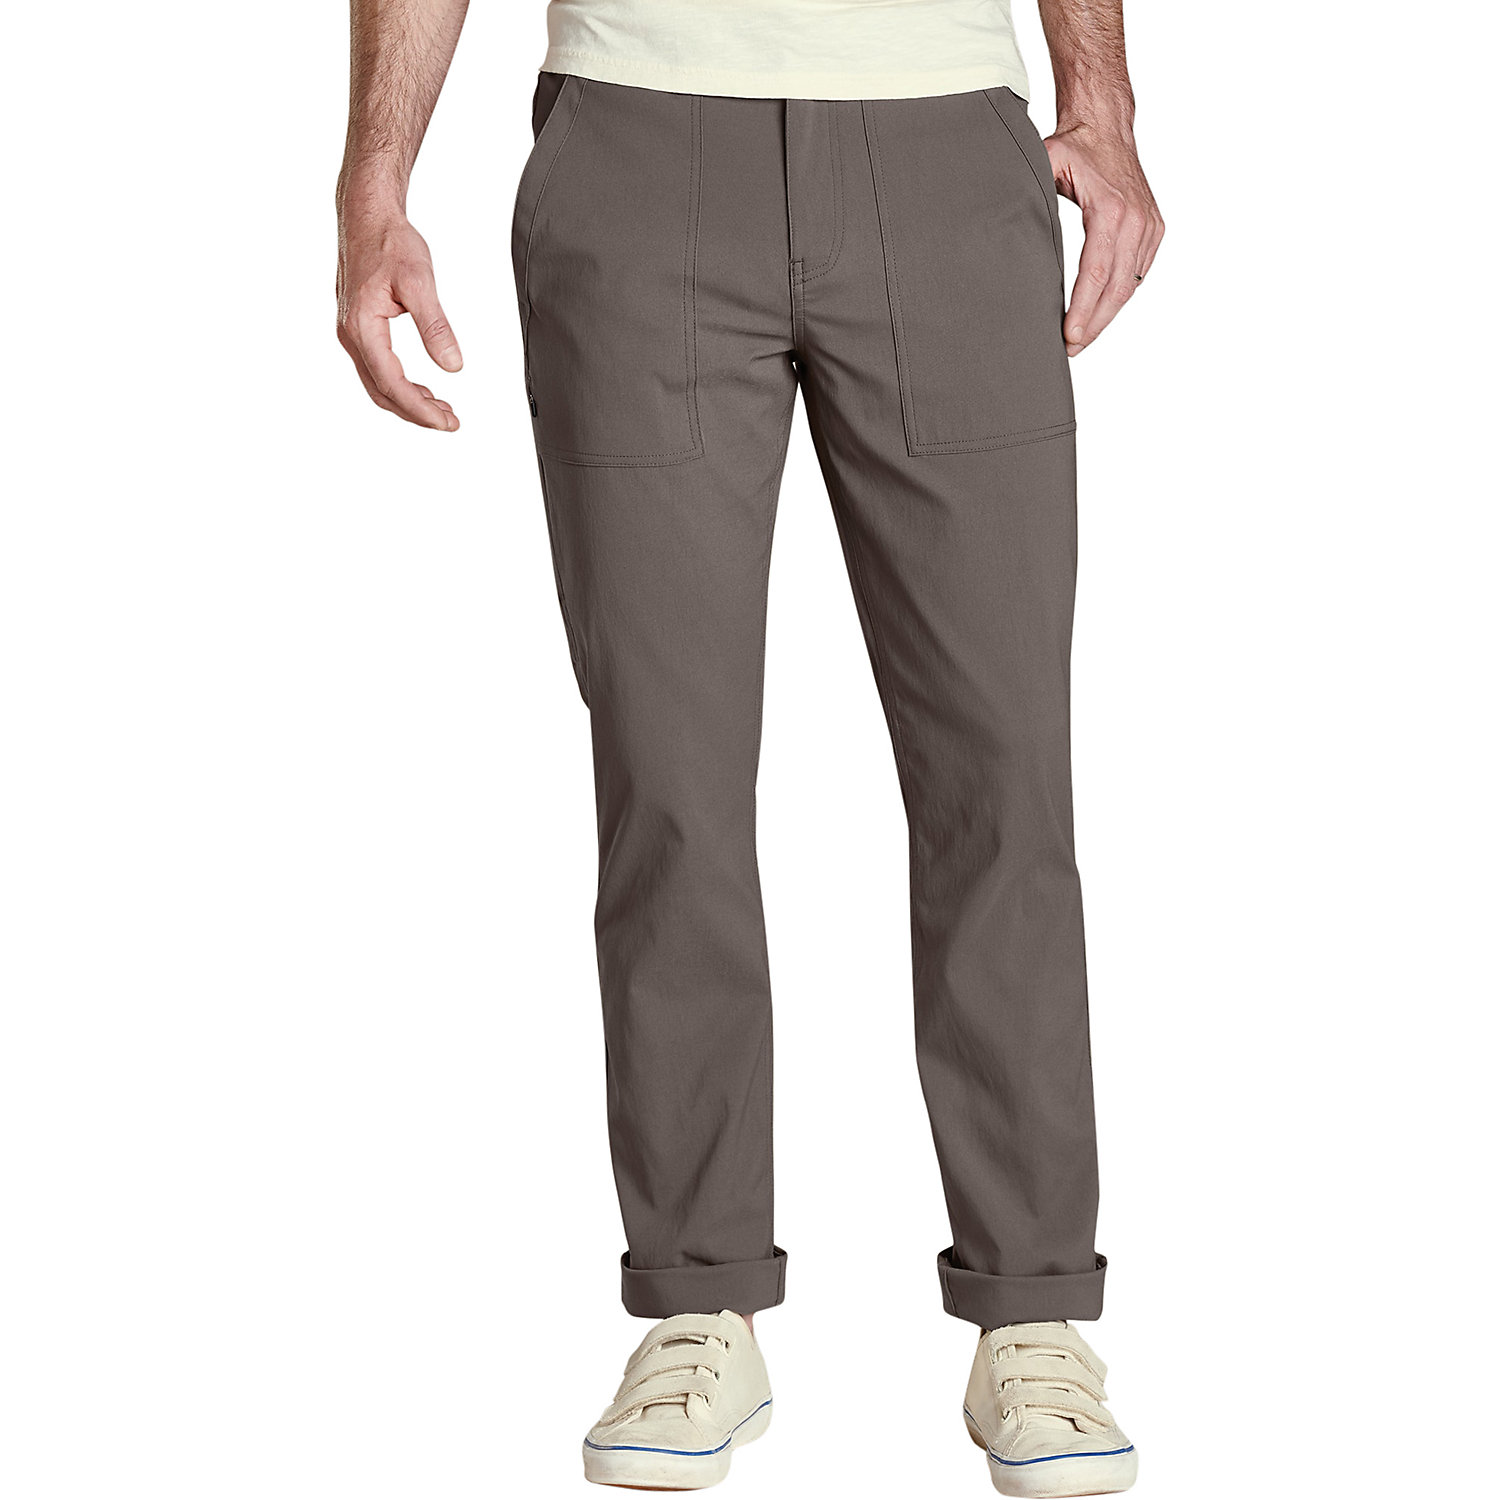 Toad & Co Mens Rover Camp Lean Pant